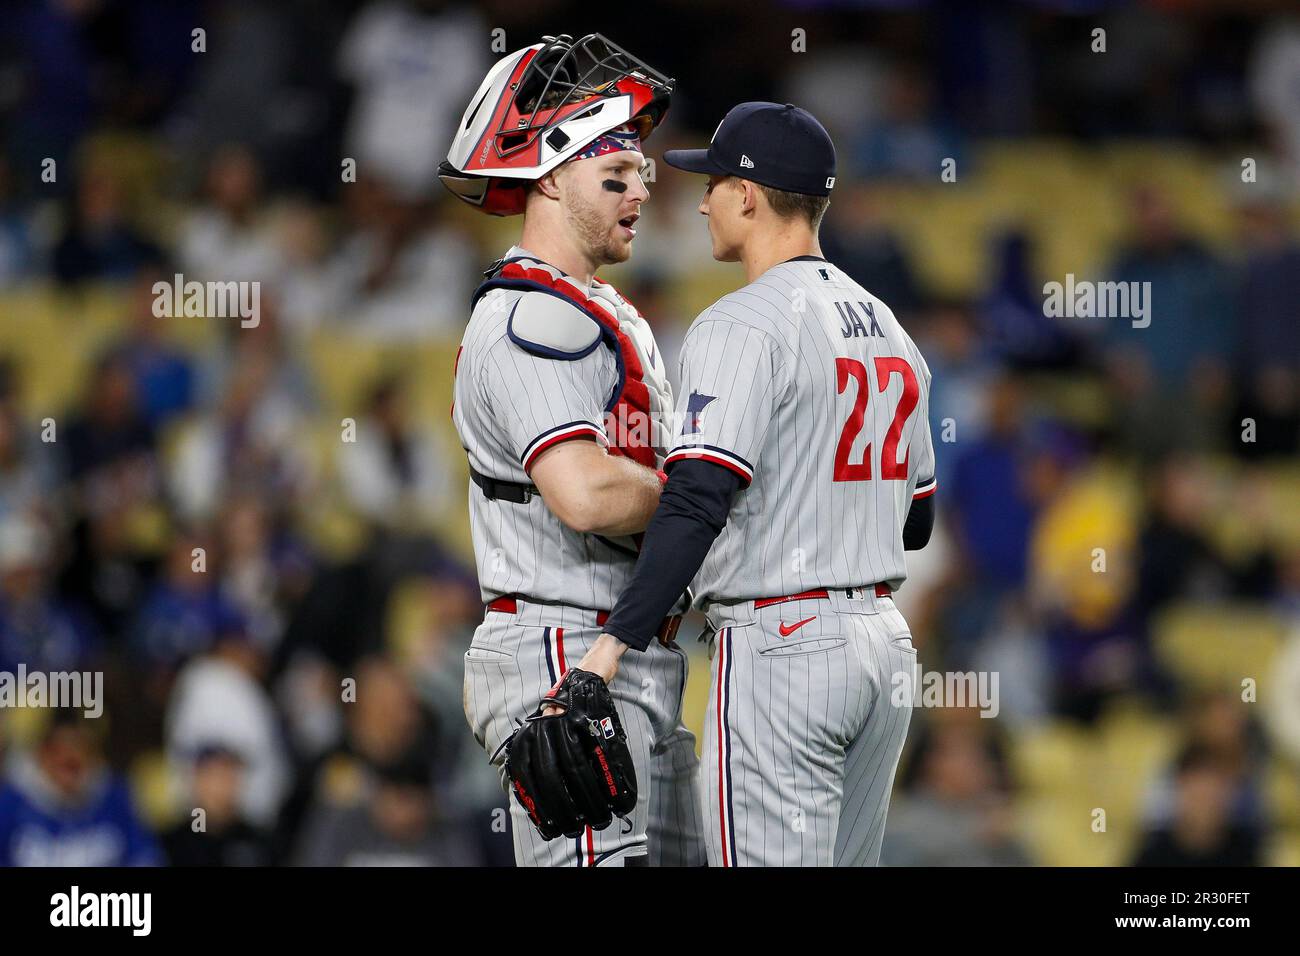 LOS ANGELES, CA - MAY 17: Minnesota Twins catcher Ryan Jeffers (27)  congratulates relief pitcher Griffin Jax (22) after their team victory in a  regular season game over the Los Angeles Dodgers